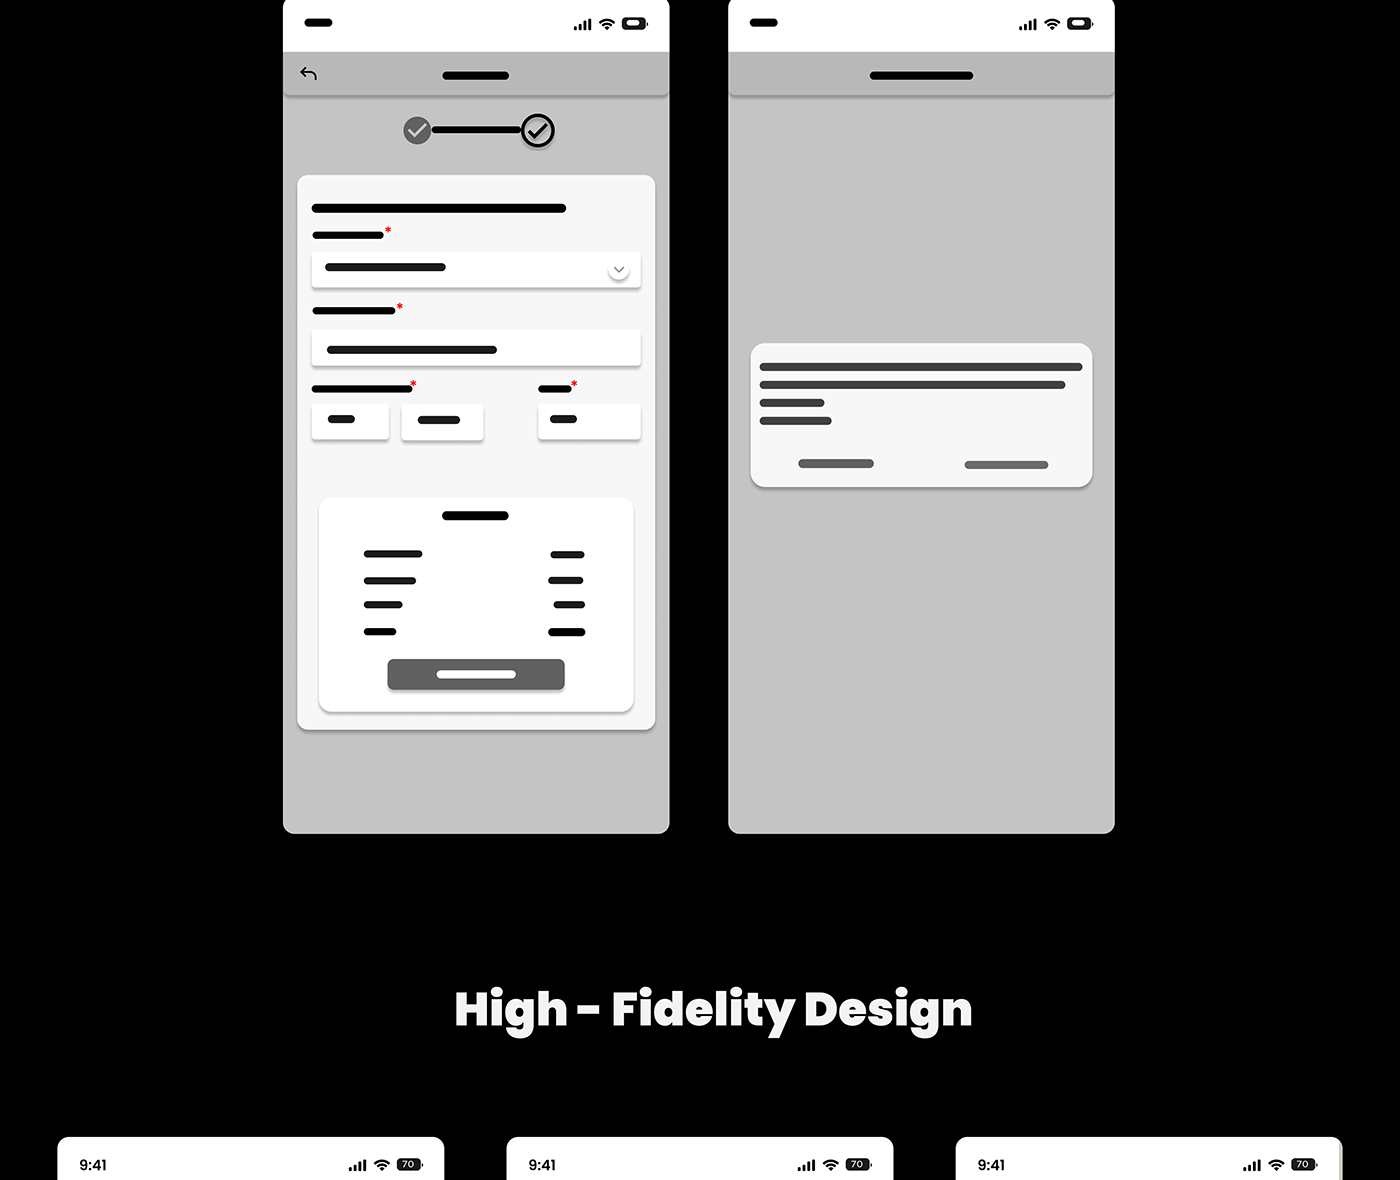 UX Research UI/UX UX design Case Study app design Figma user experience ai ai features Clothing